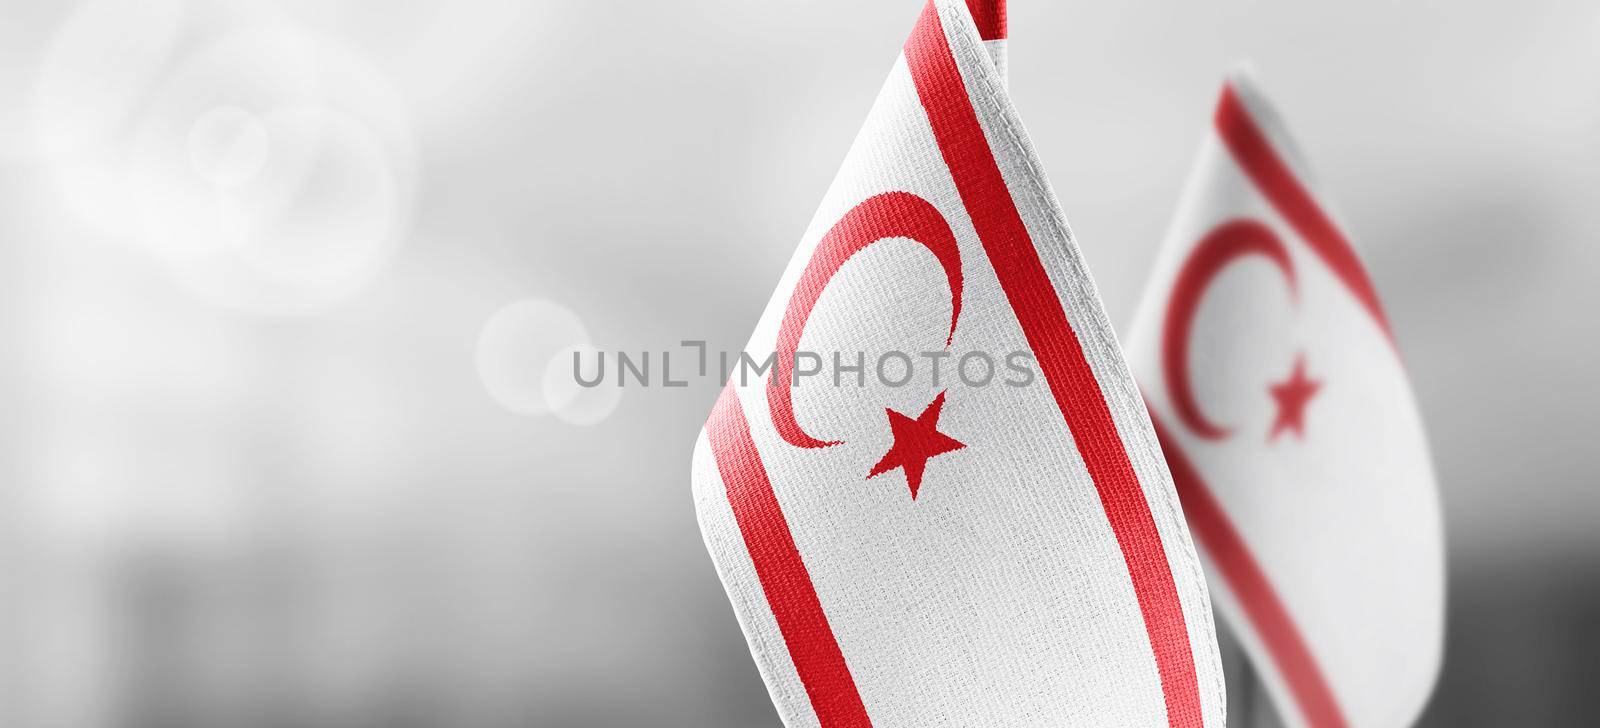 Patch of the national flag of the Northern Cyprus on a white t-shirt.